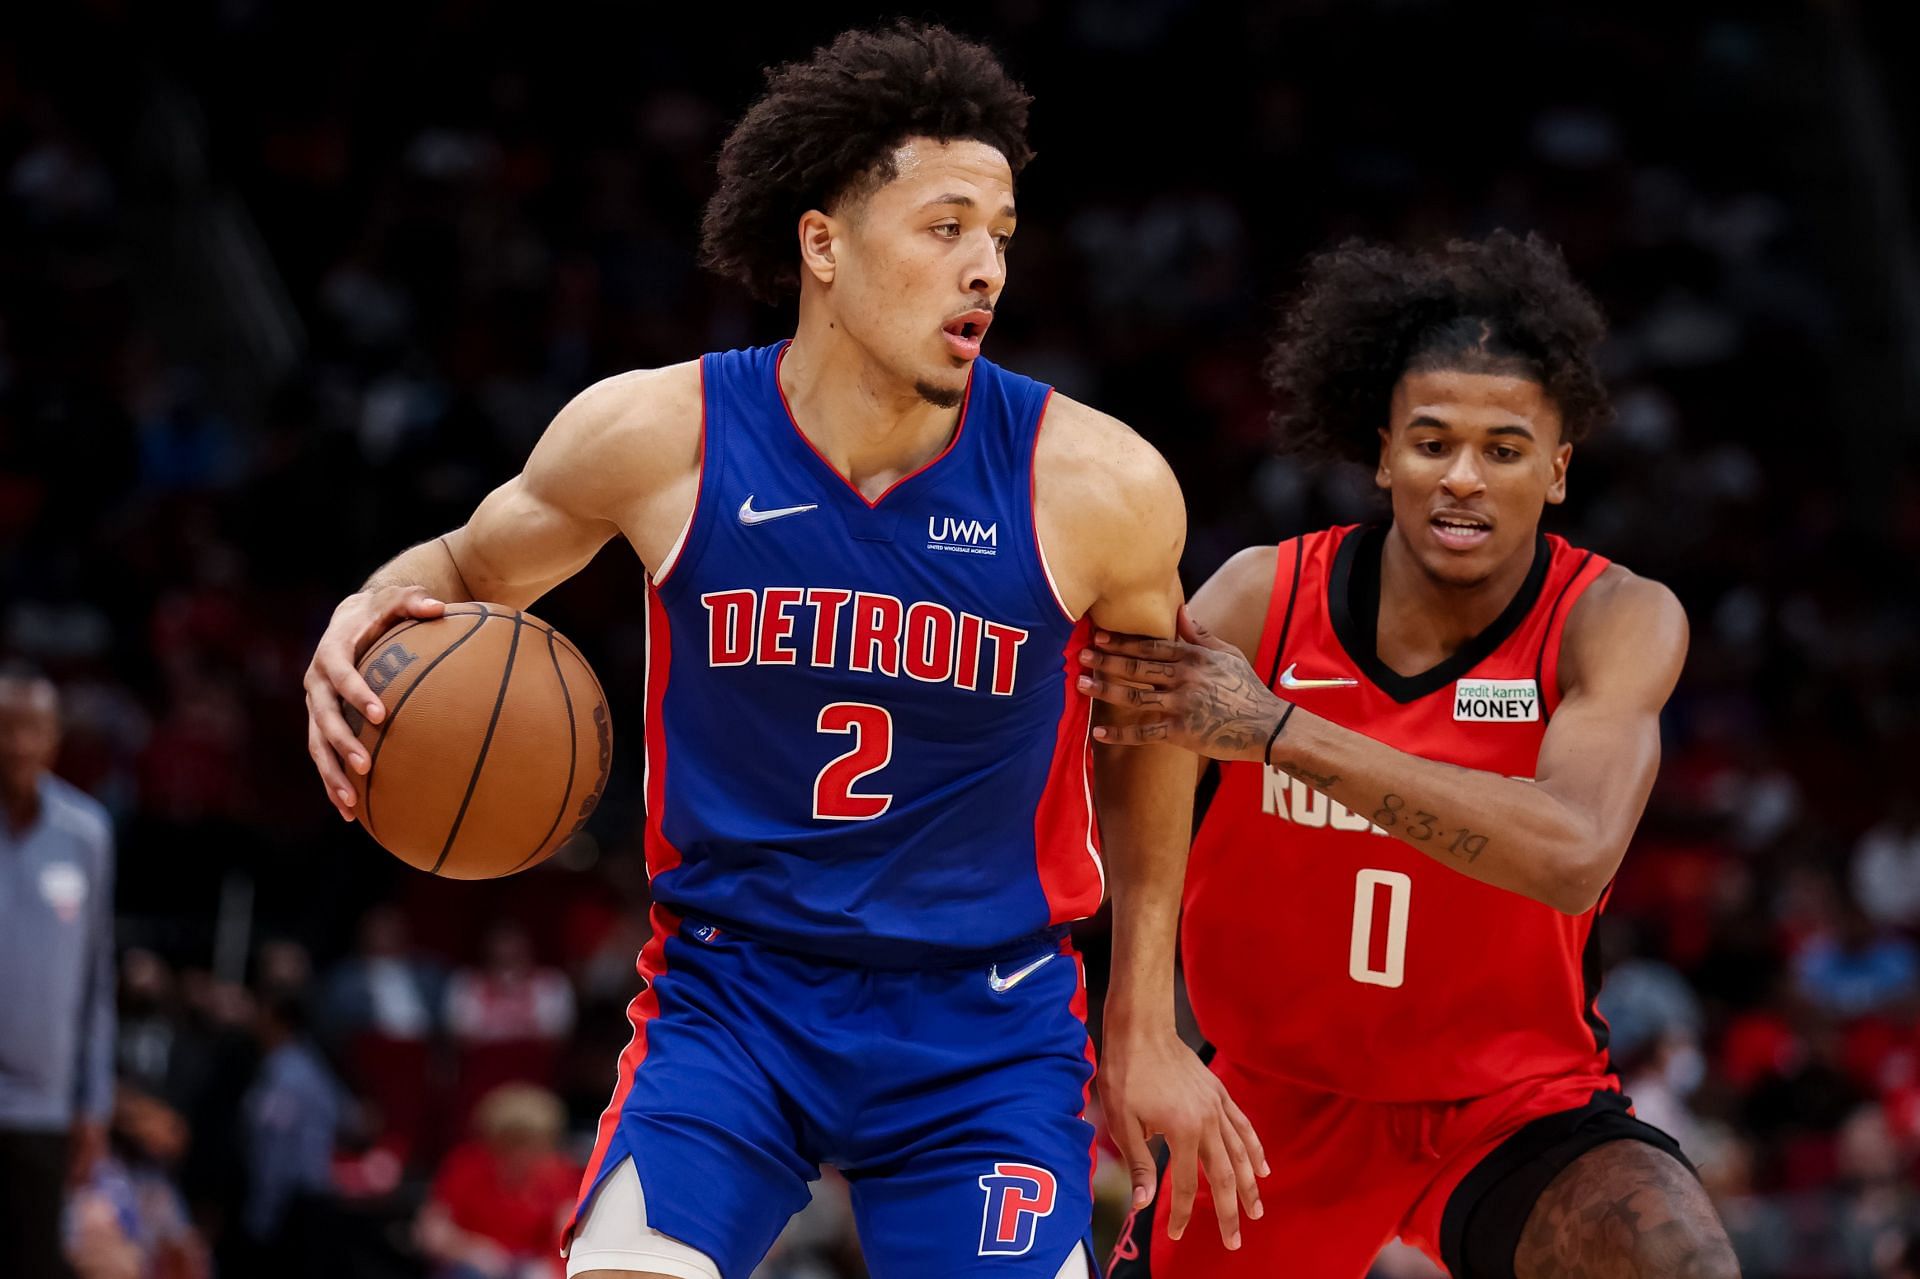 Detroit Pistons and Houston Rockets rising stars Cade Cunningham and Jalen Green